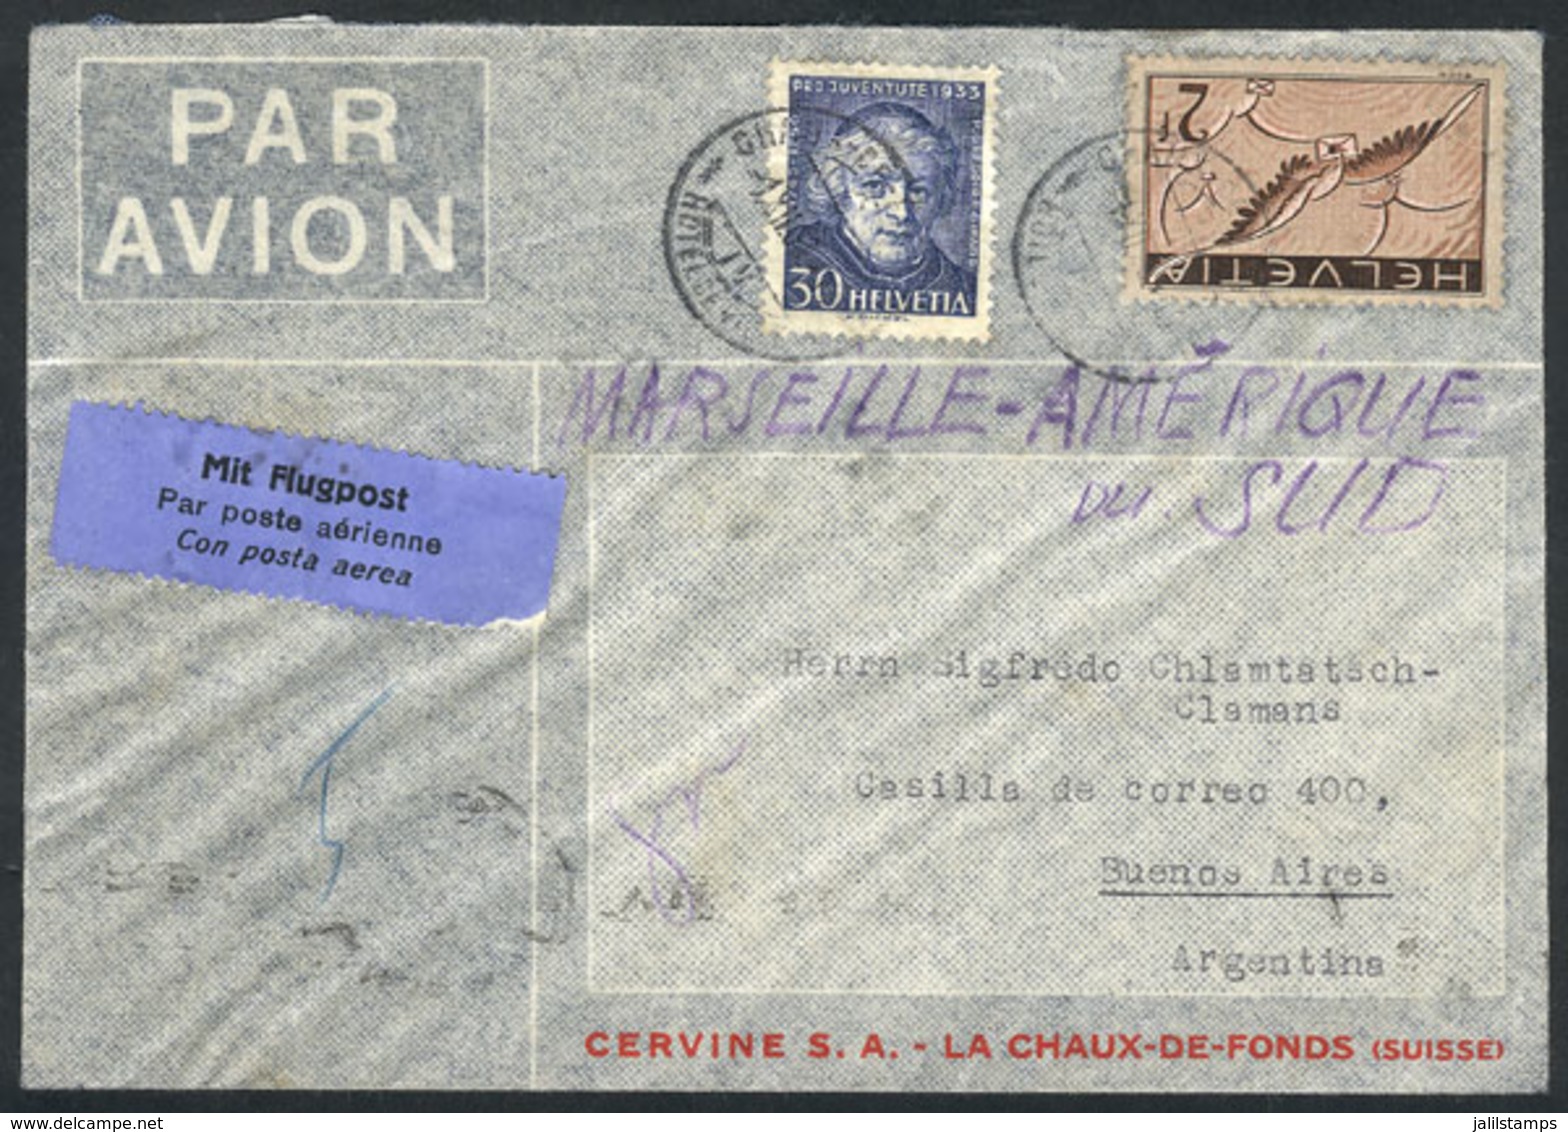 SWITZERLAND: Airmail Cover Sent To Argentina On 1/DE/1933 Franked With 2.30Fr., VF Quality! - Briefe U. Dokumente